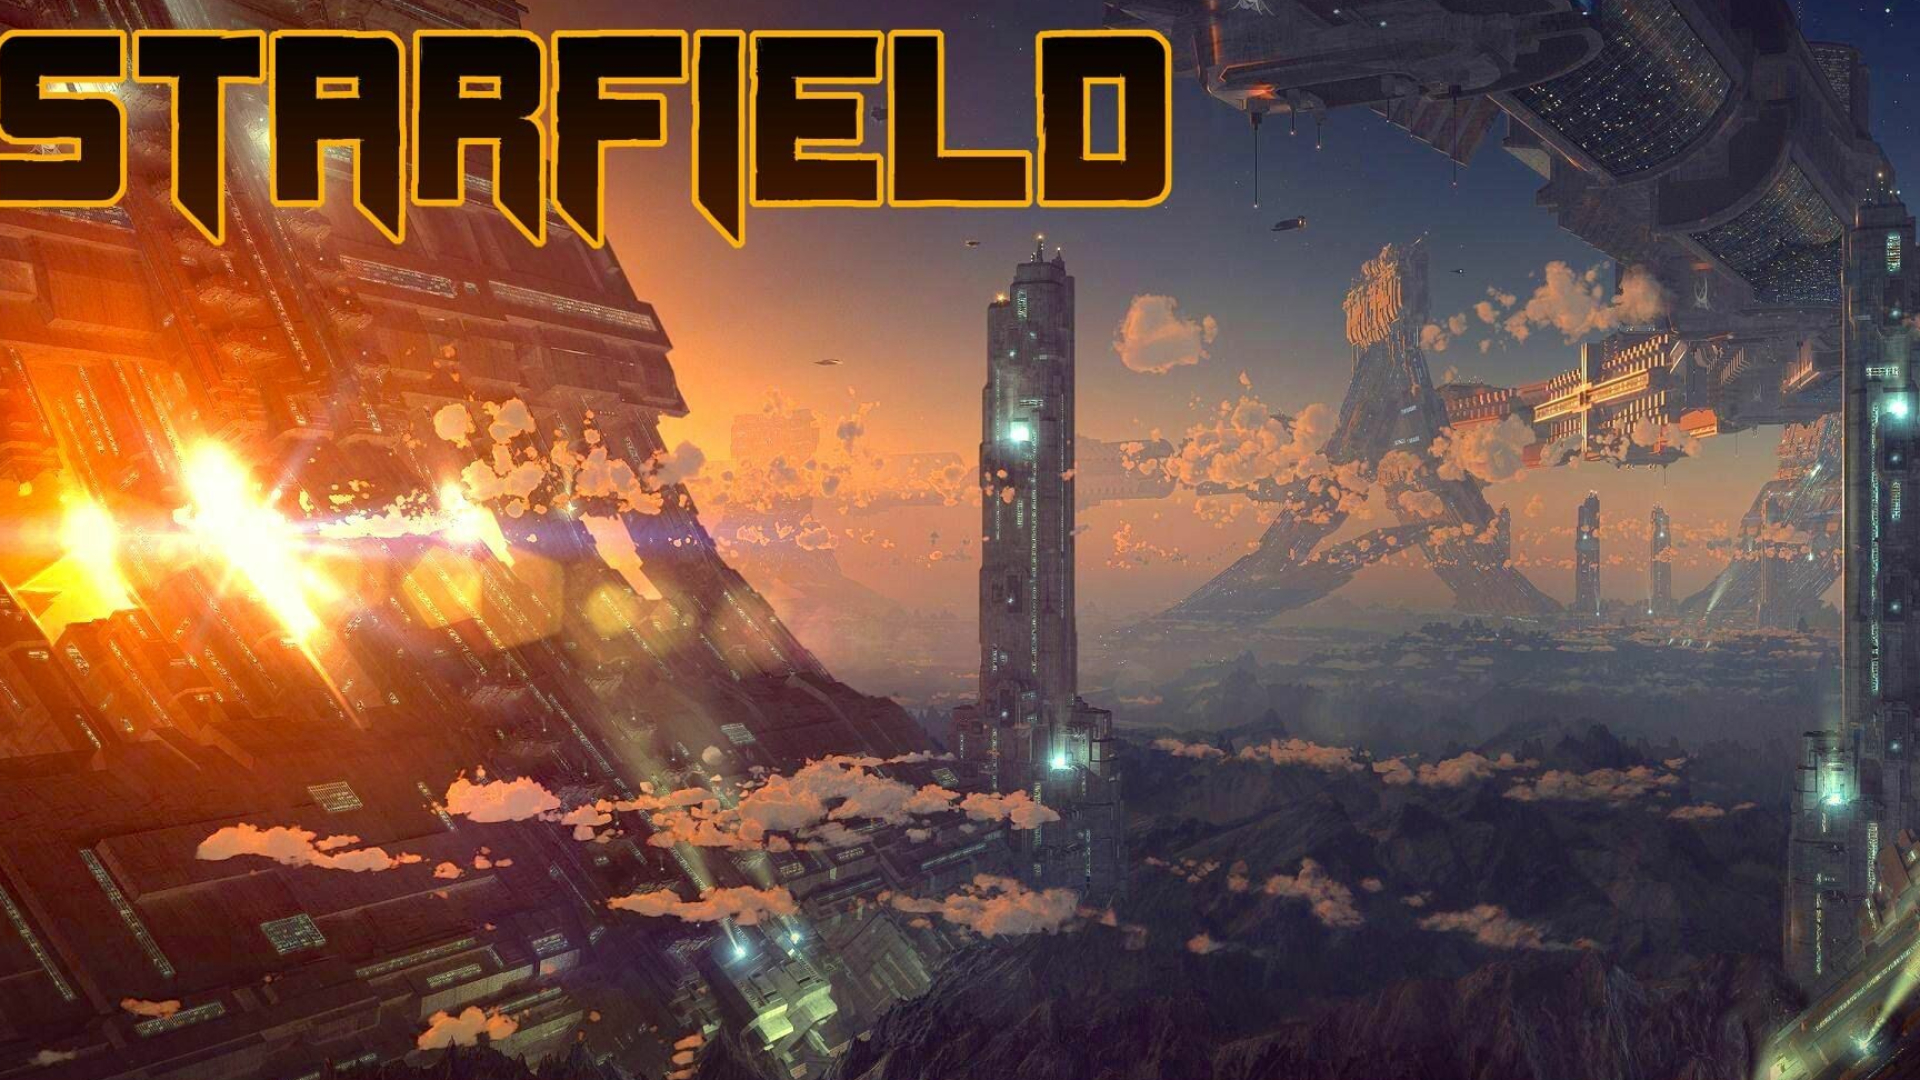 Starfield: Developed by Bethesda Game Studios and published by Bethesda Softworks. 1920x1080 Full HD Wallpaper.